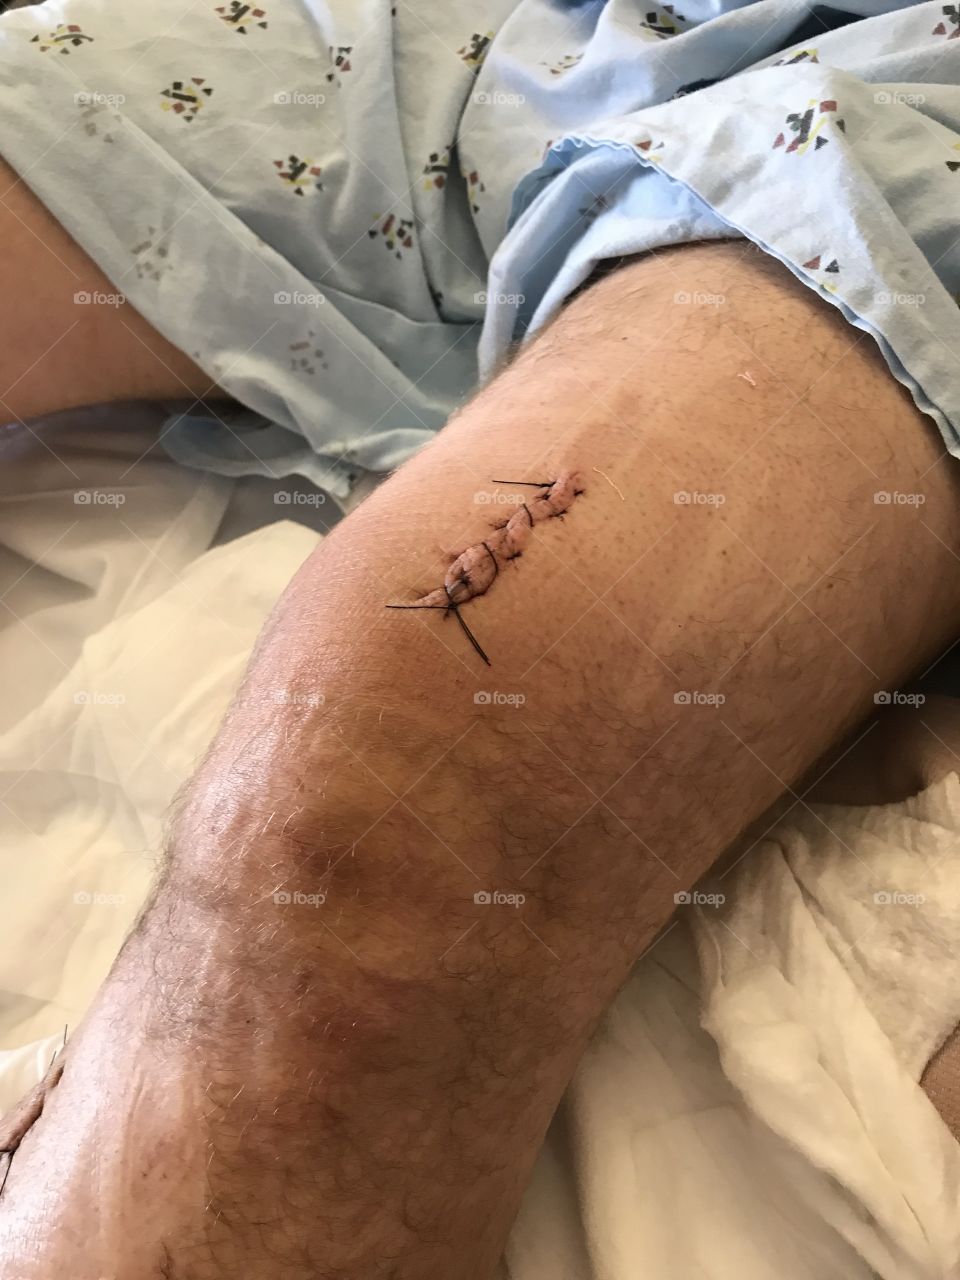 Stitches above the knee